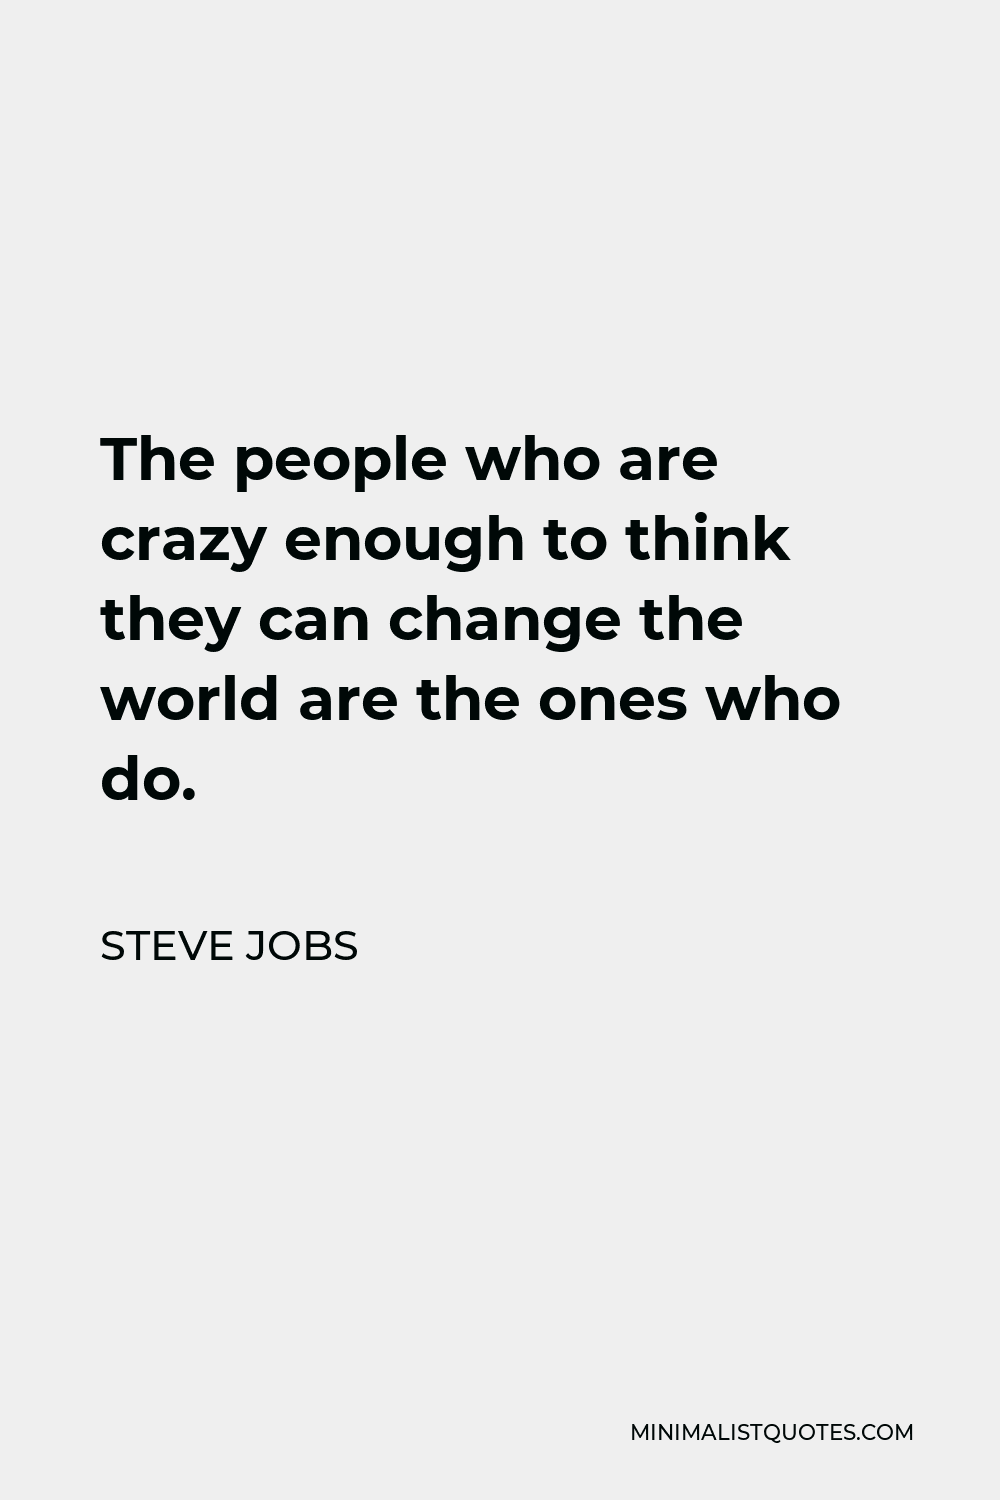 Steve Jobs Quote - The people who are crazy enough to think they can change the world are the ones who do.